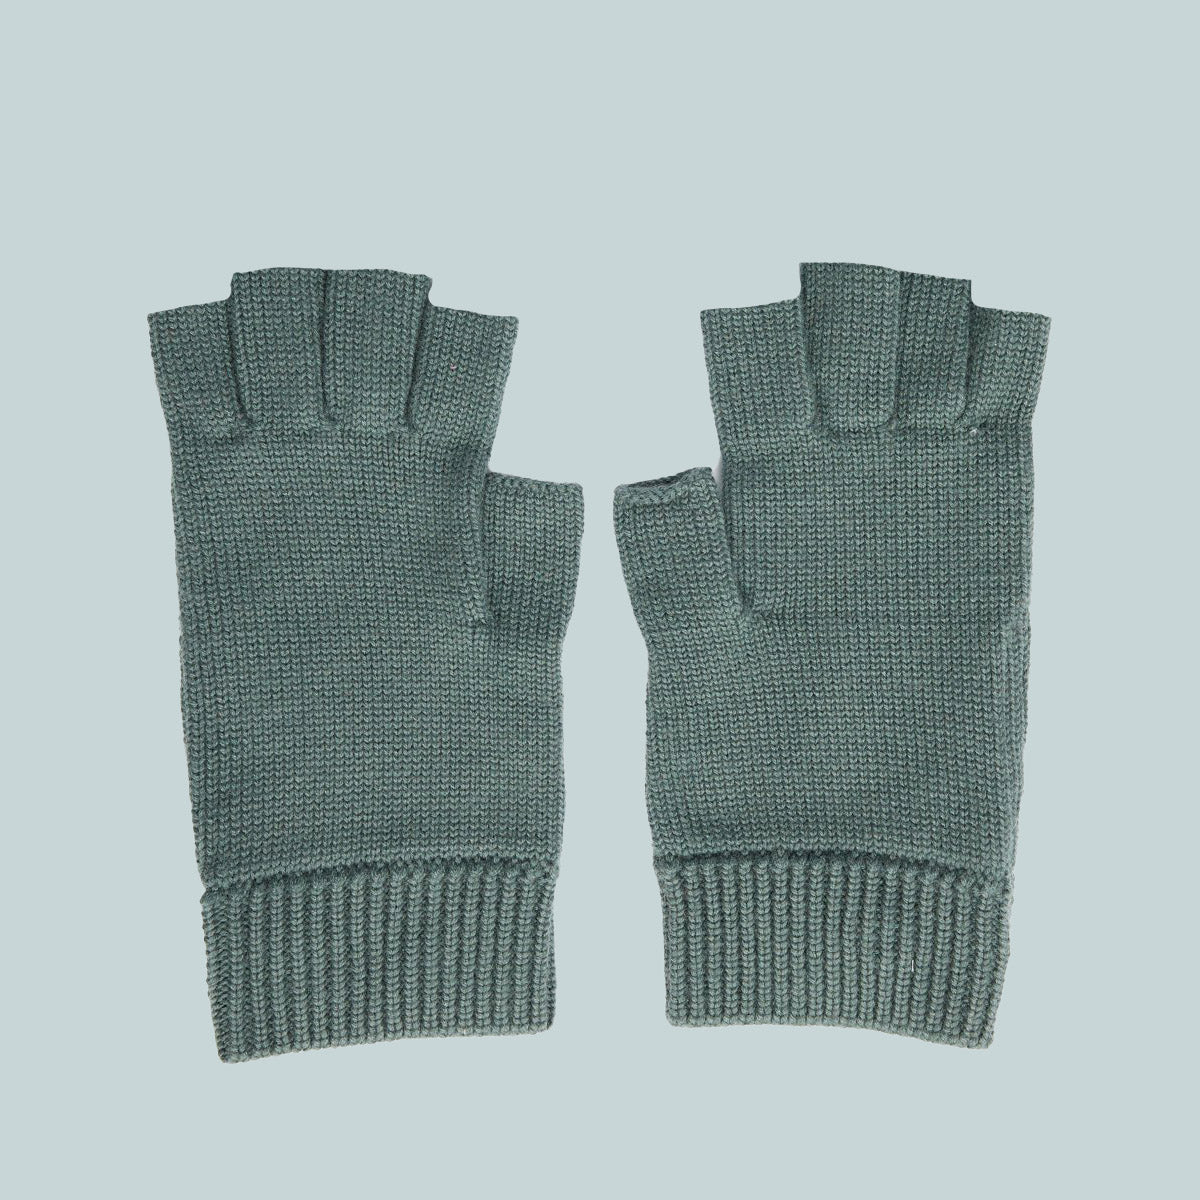 Knit mittens teal